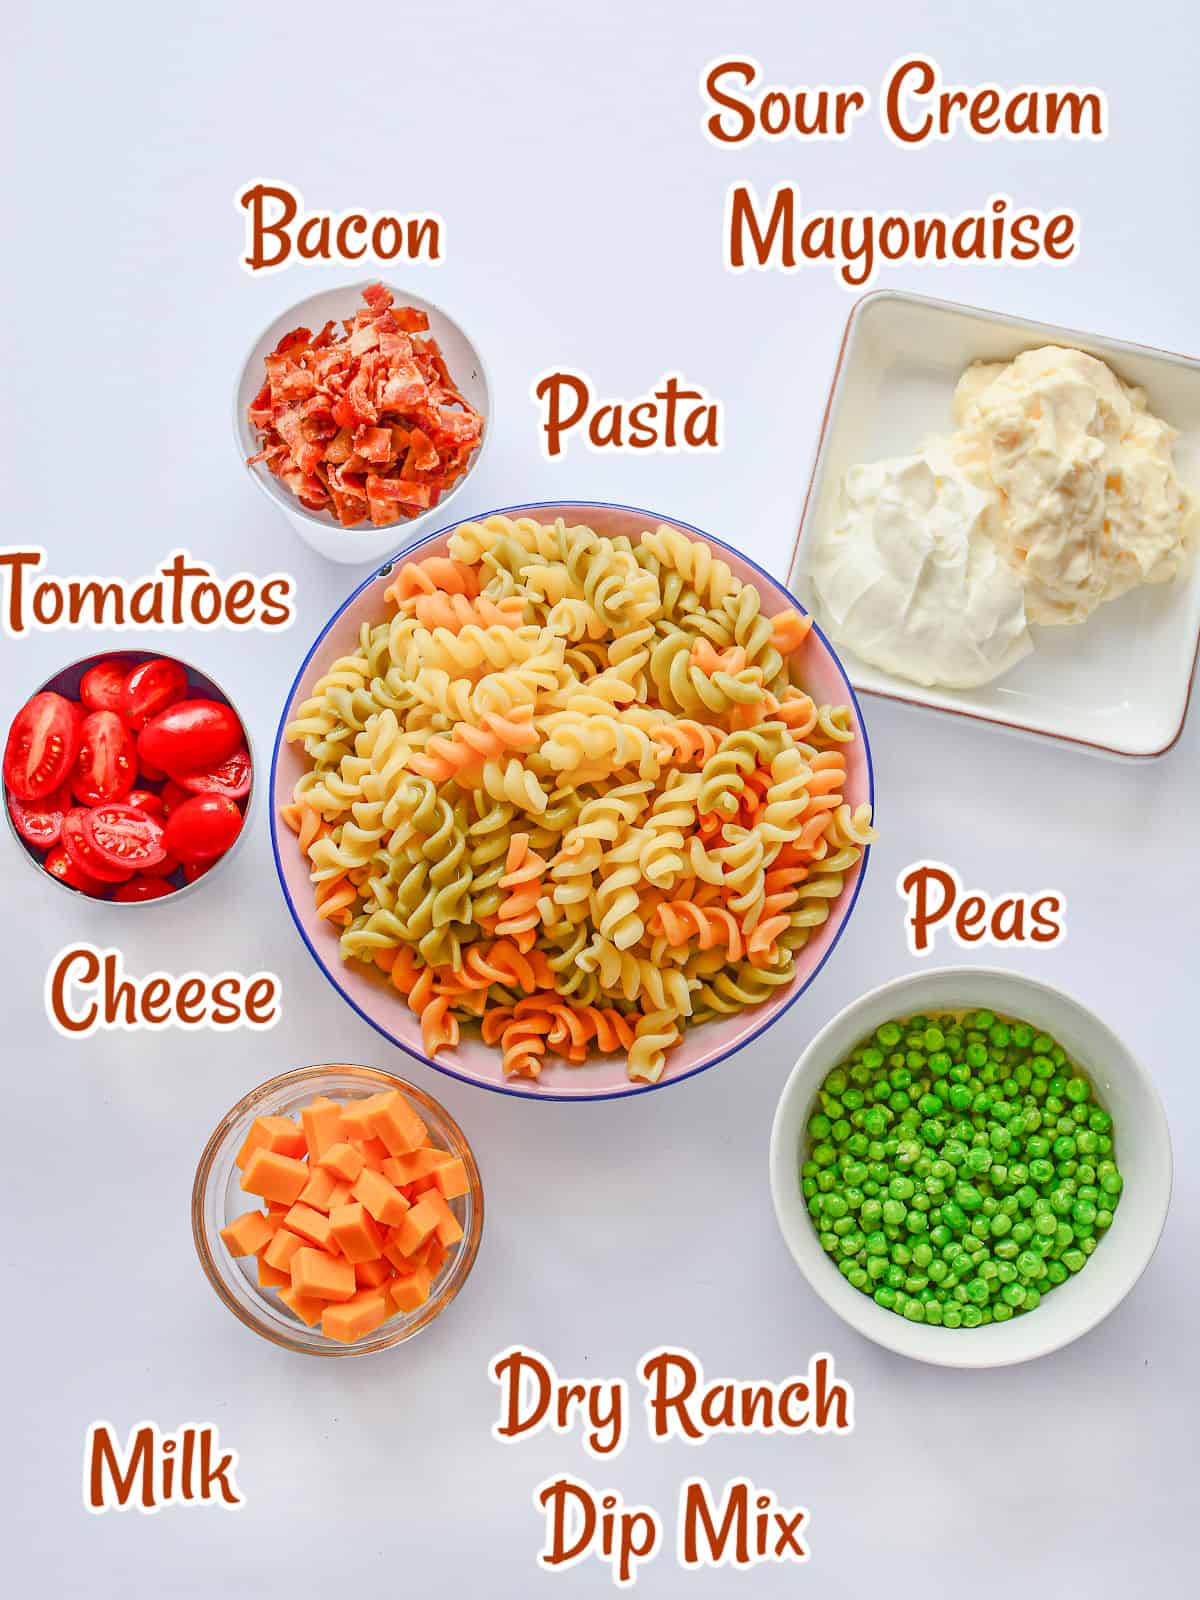 Ingredients for a pasta salad, peas, cheese, pasta, mayonnaise, and bacon.